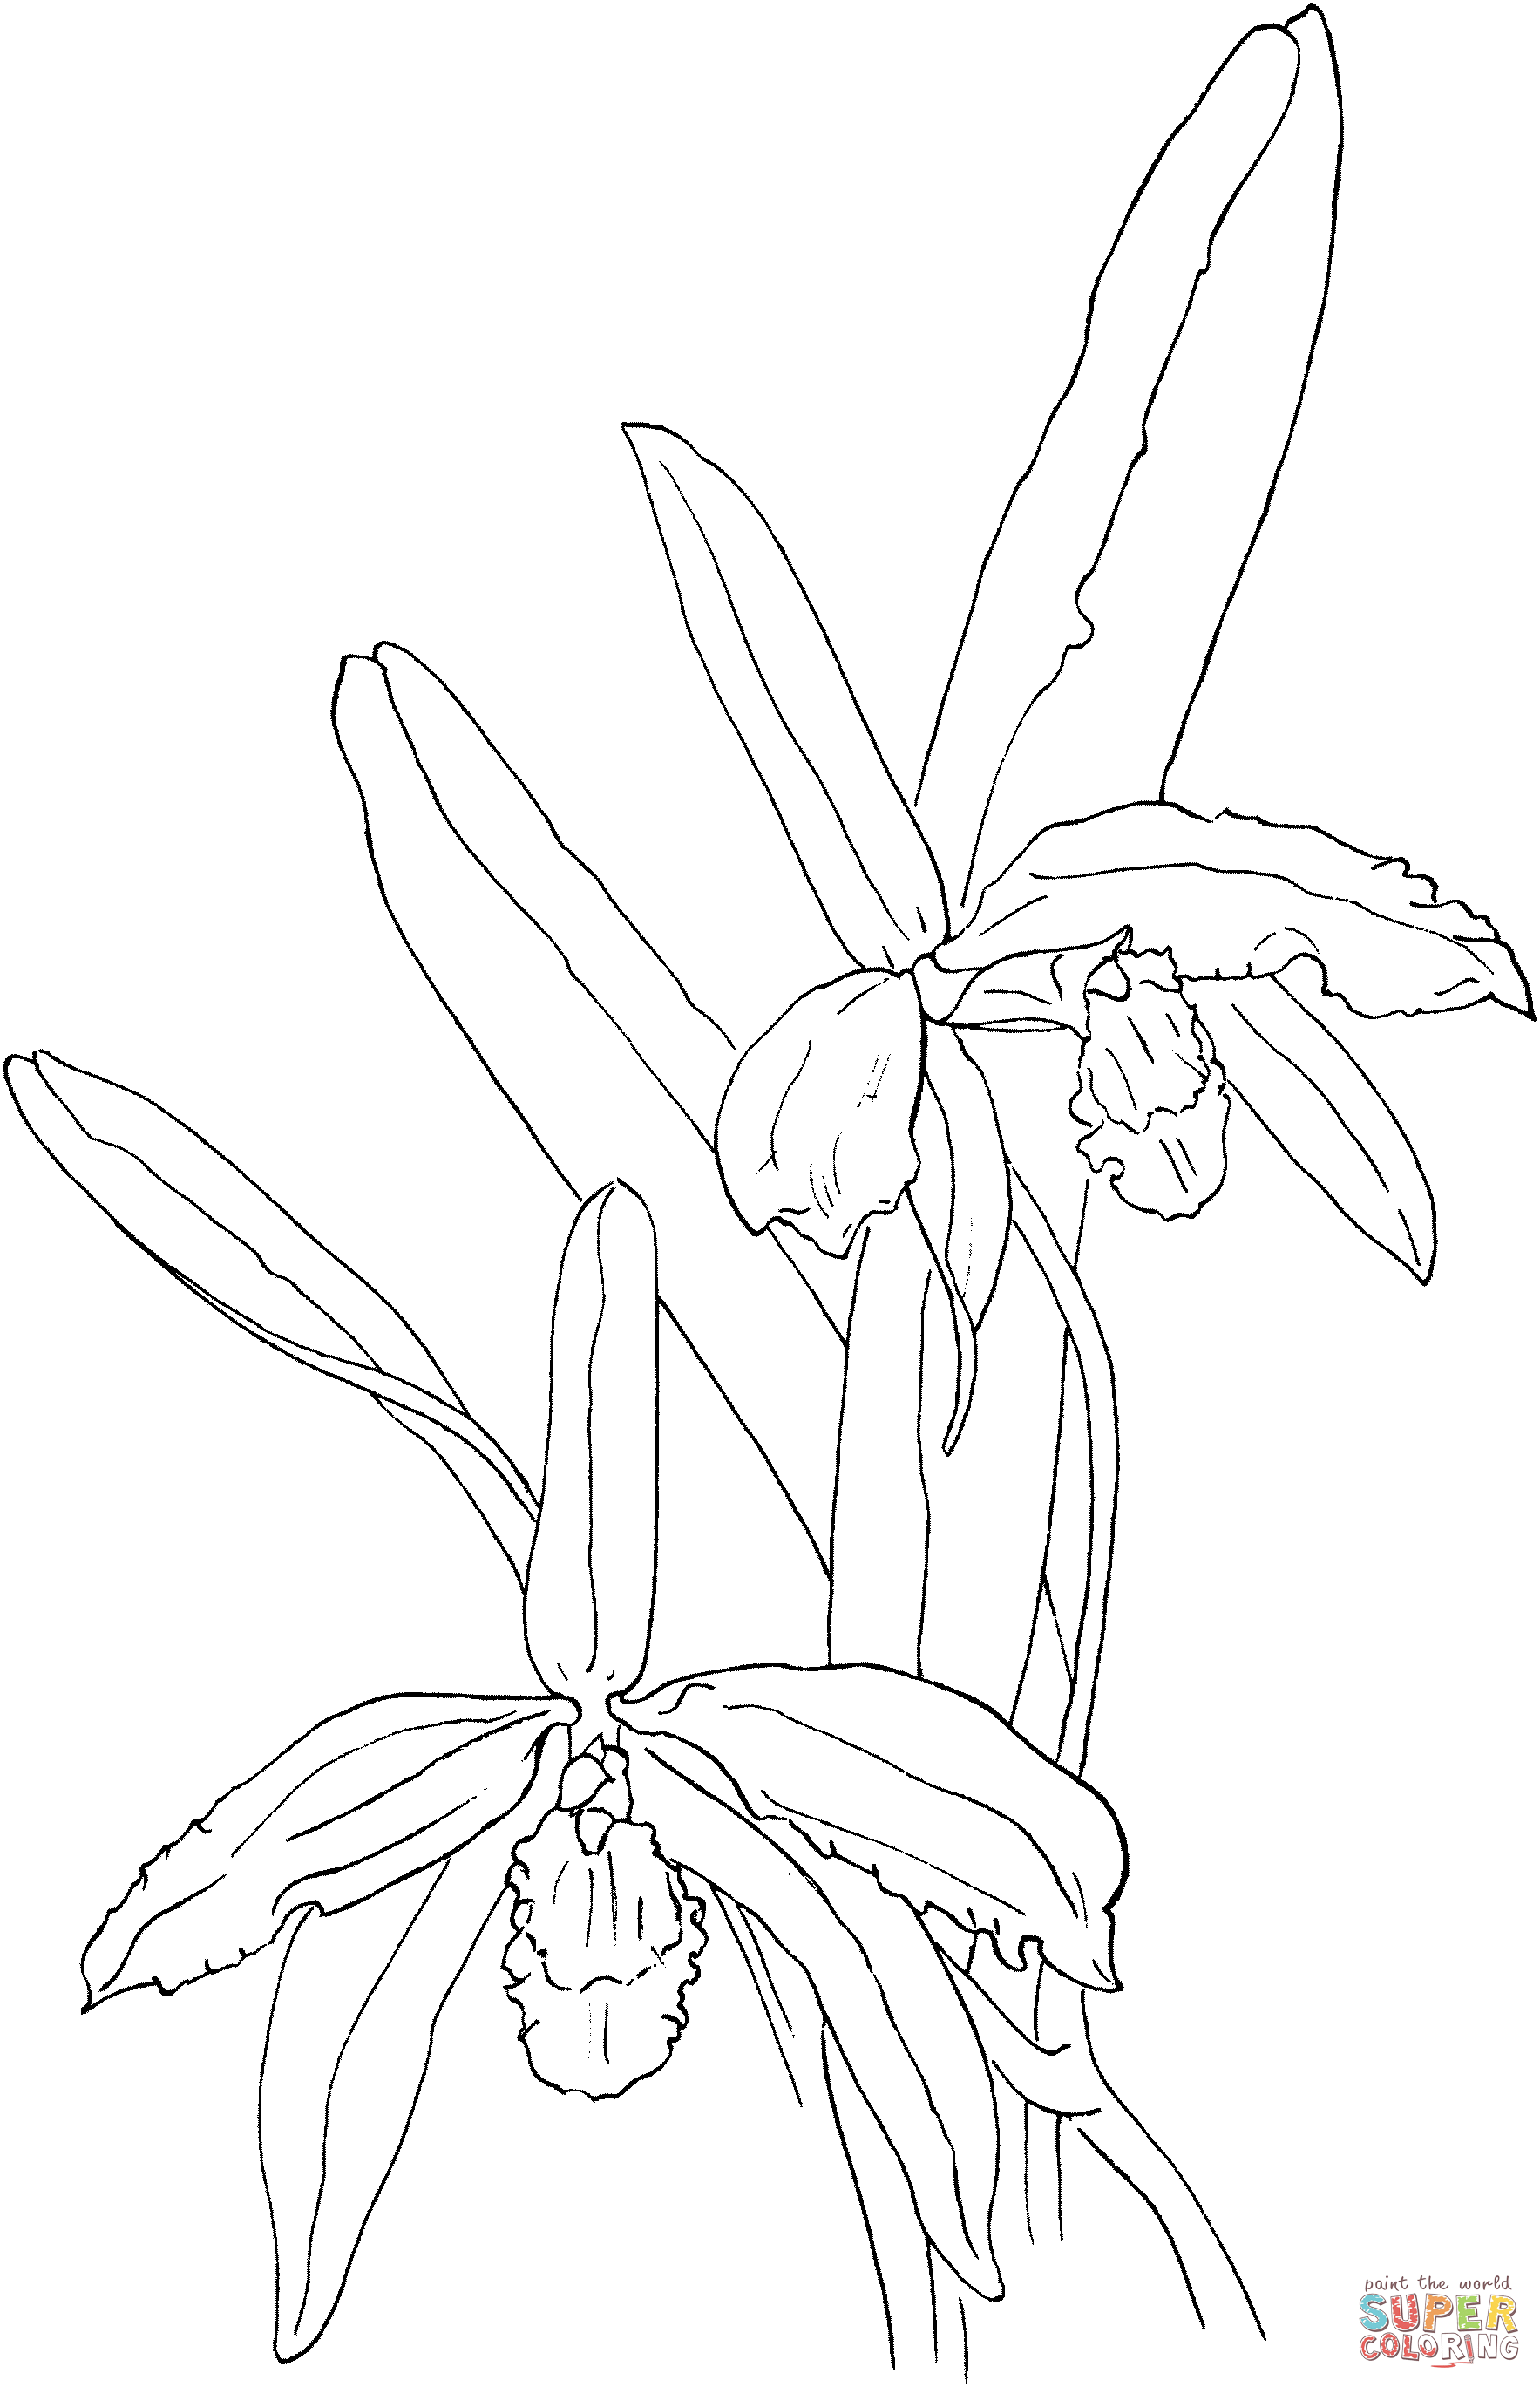 Cattleya Perrinii Or Perrin's Sophronitis Orchid Coloring Pages